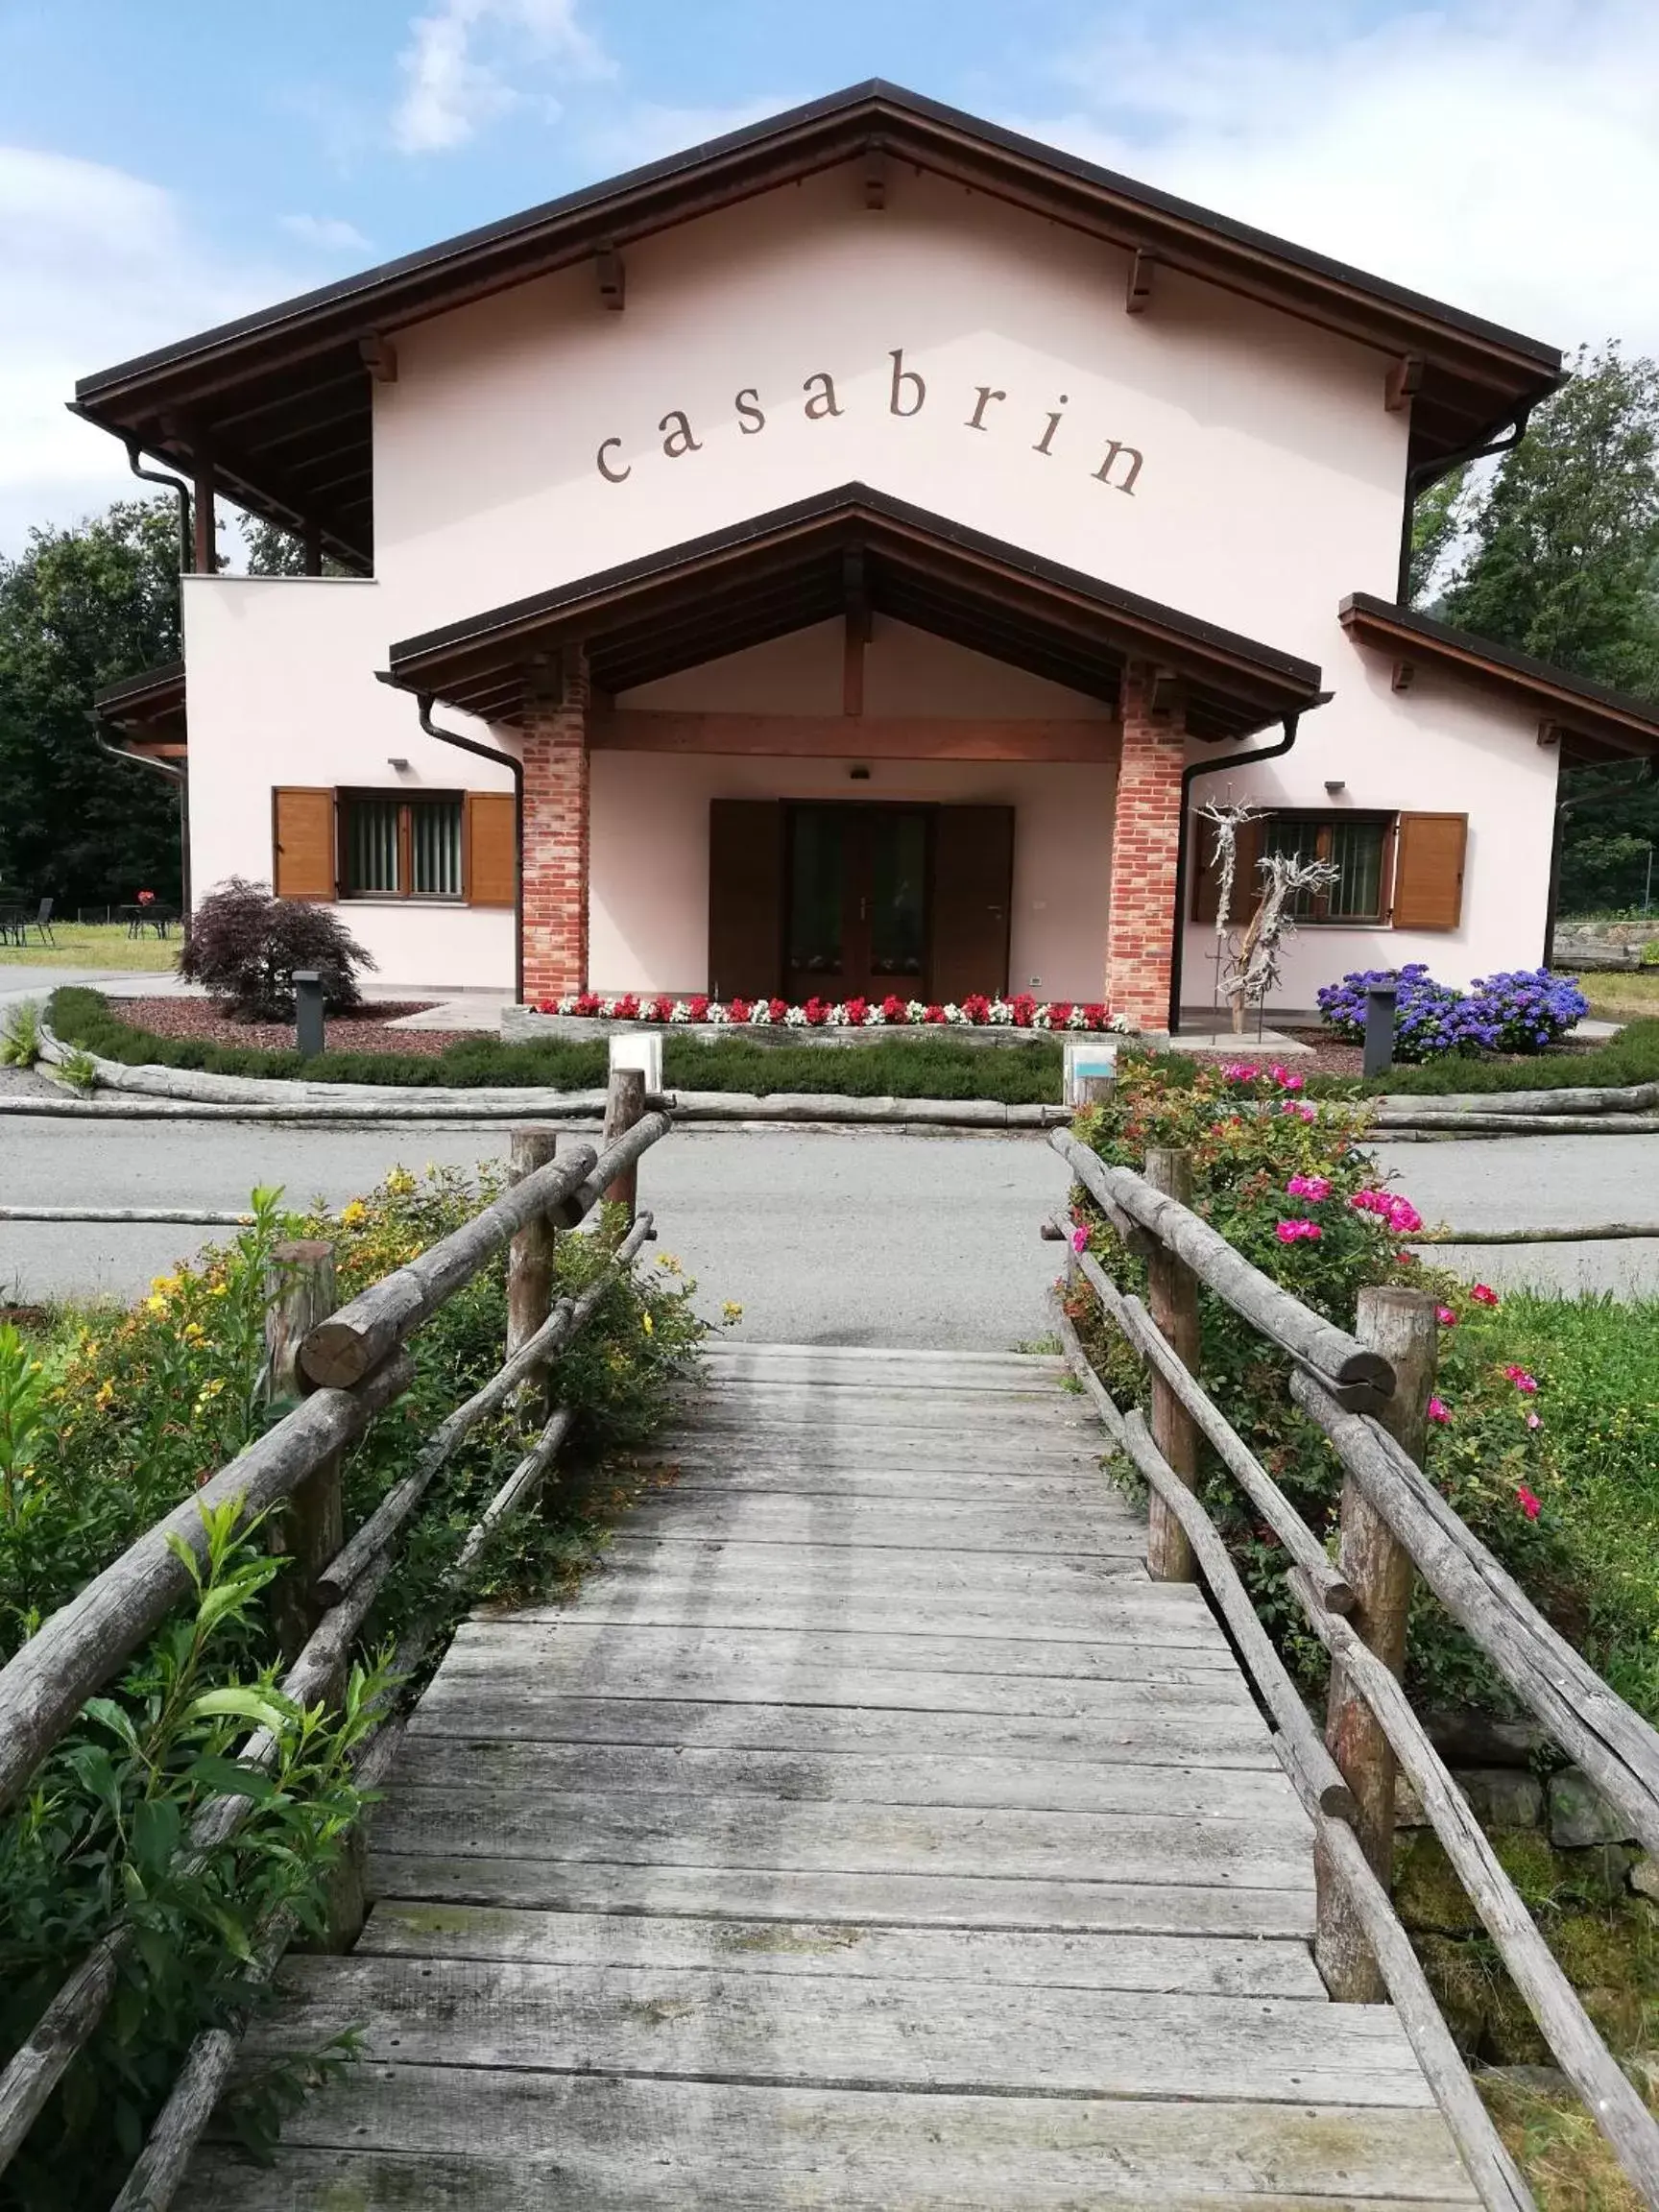 Property building in Casabrin